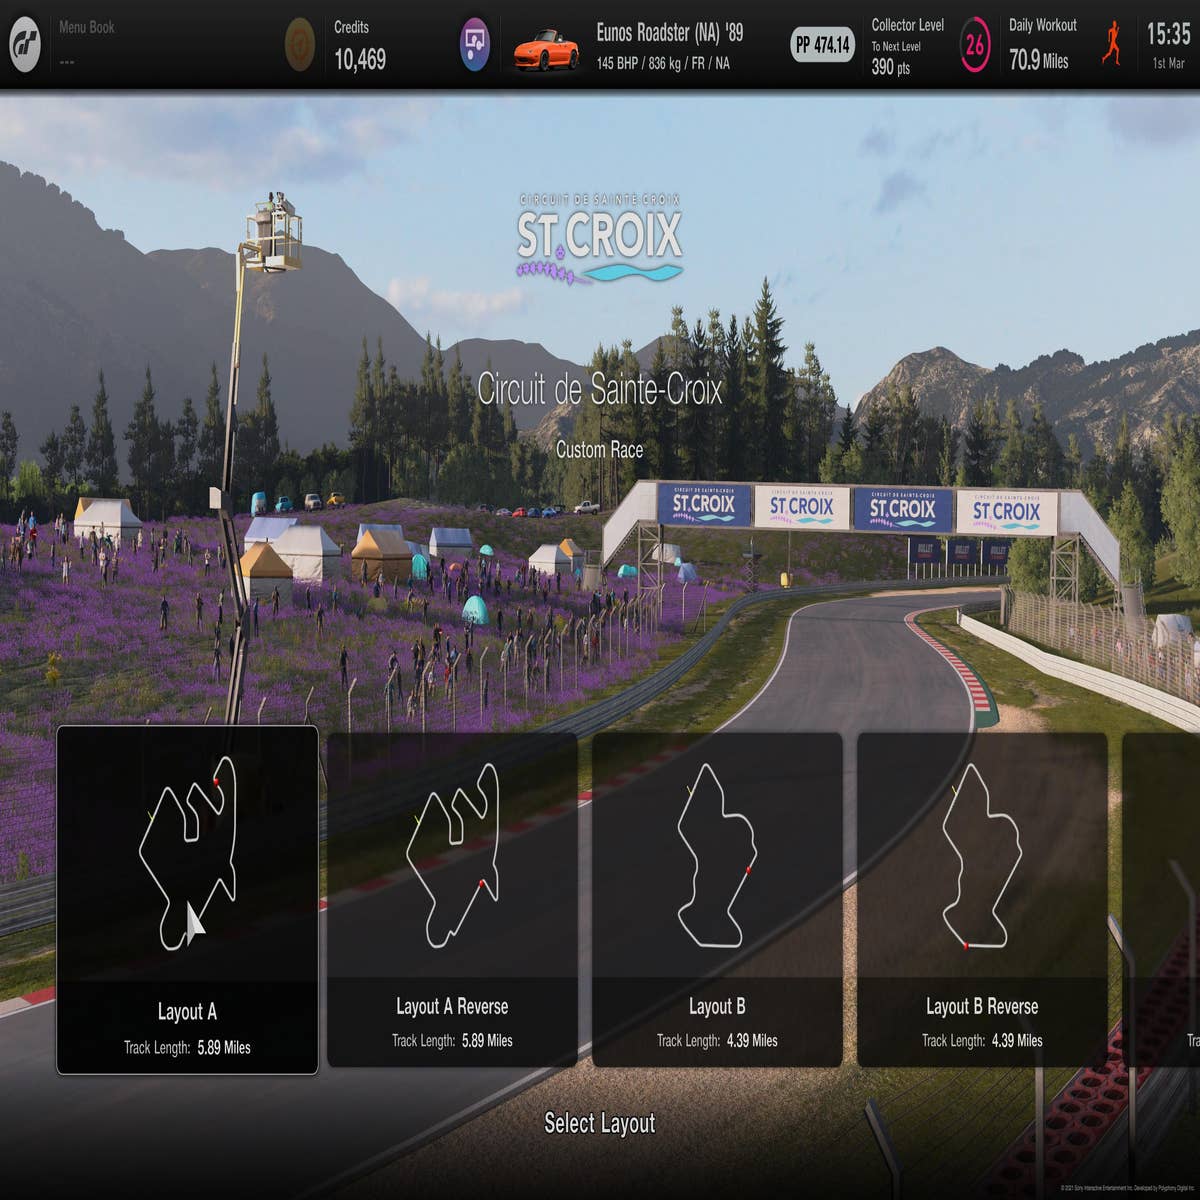 Gran Turismo 7 Track List: How to unlock tracks, how many tracks and which  tracks support wet weather explained